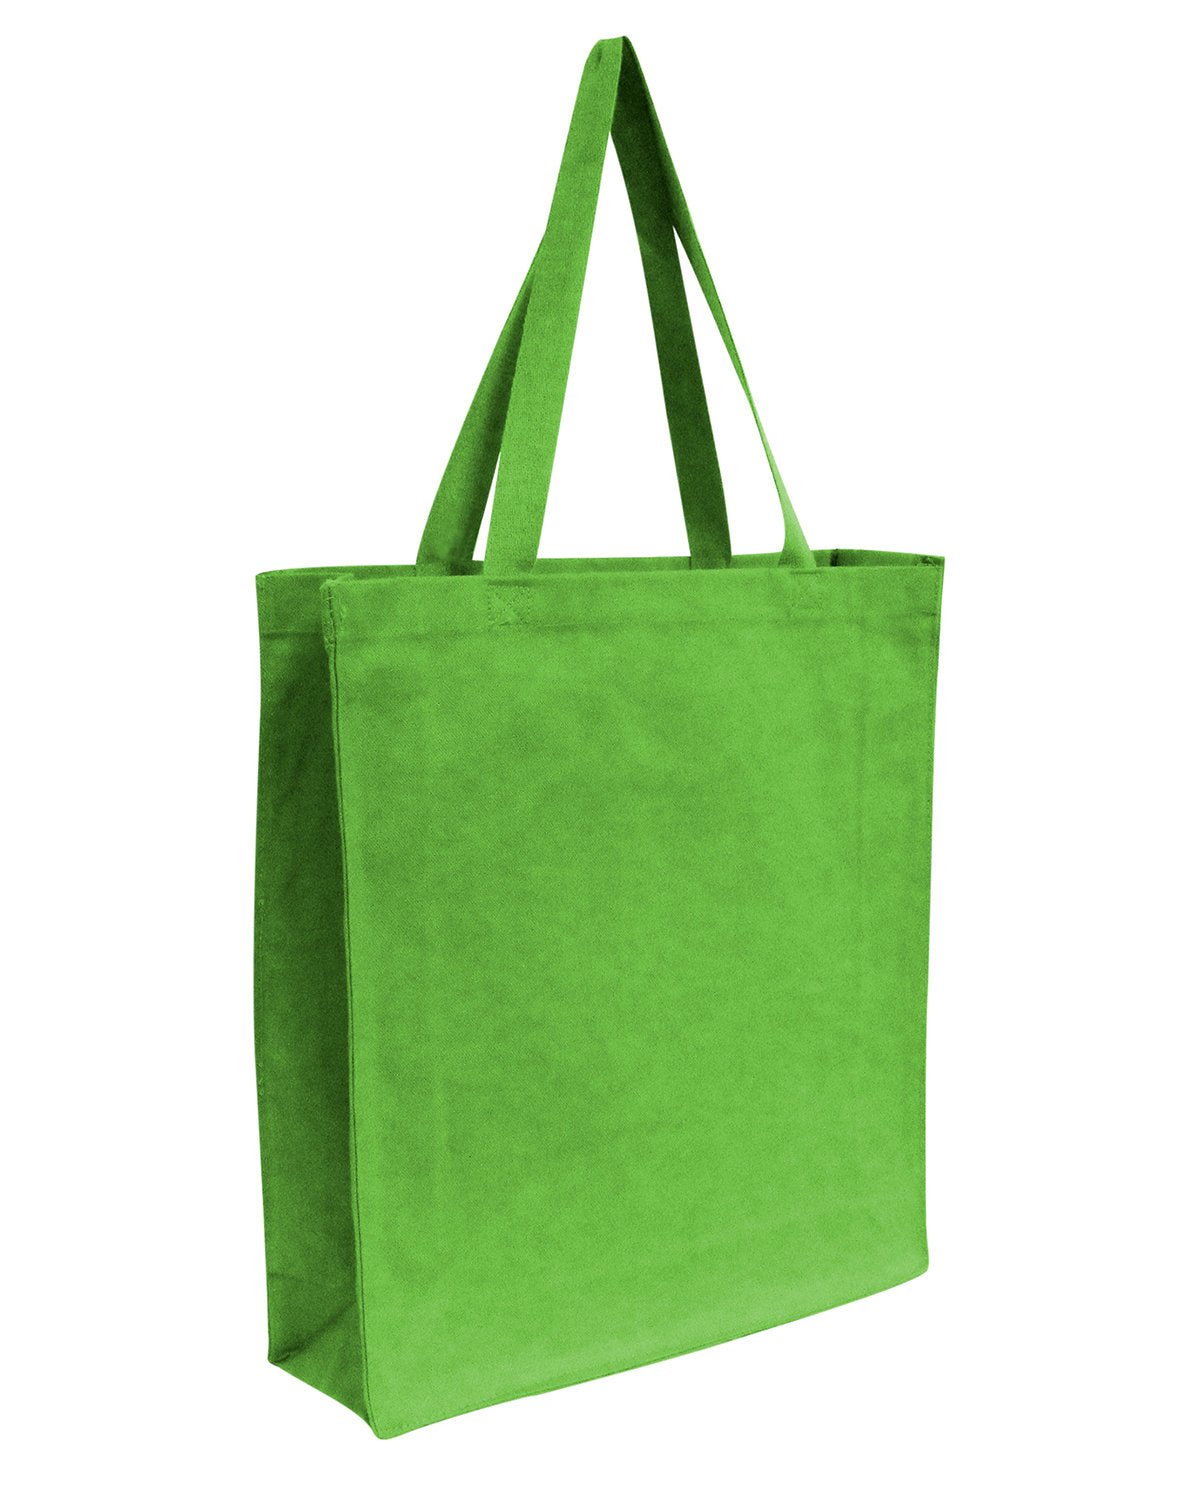 OAD100-OAD-LIME GREEN-OAD-Bags and Accessories-1